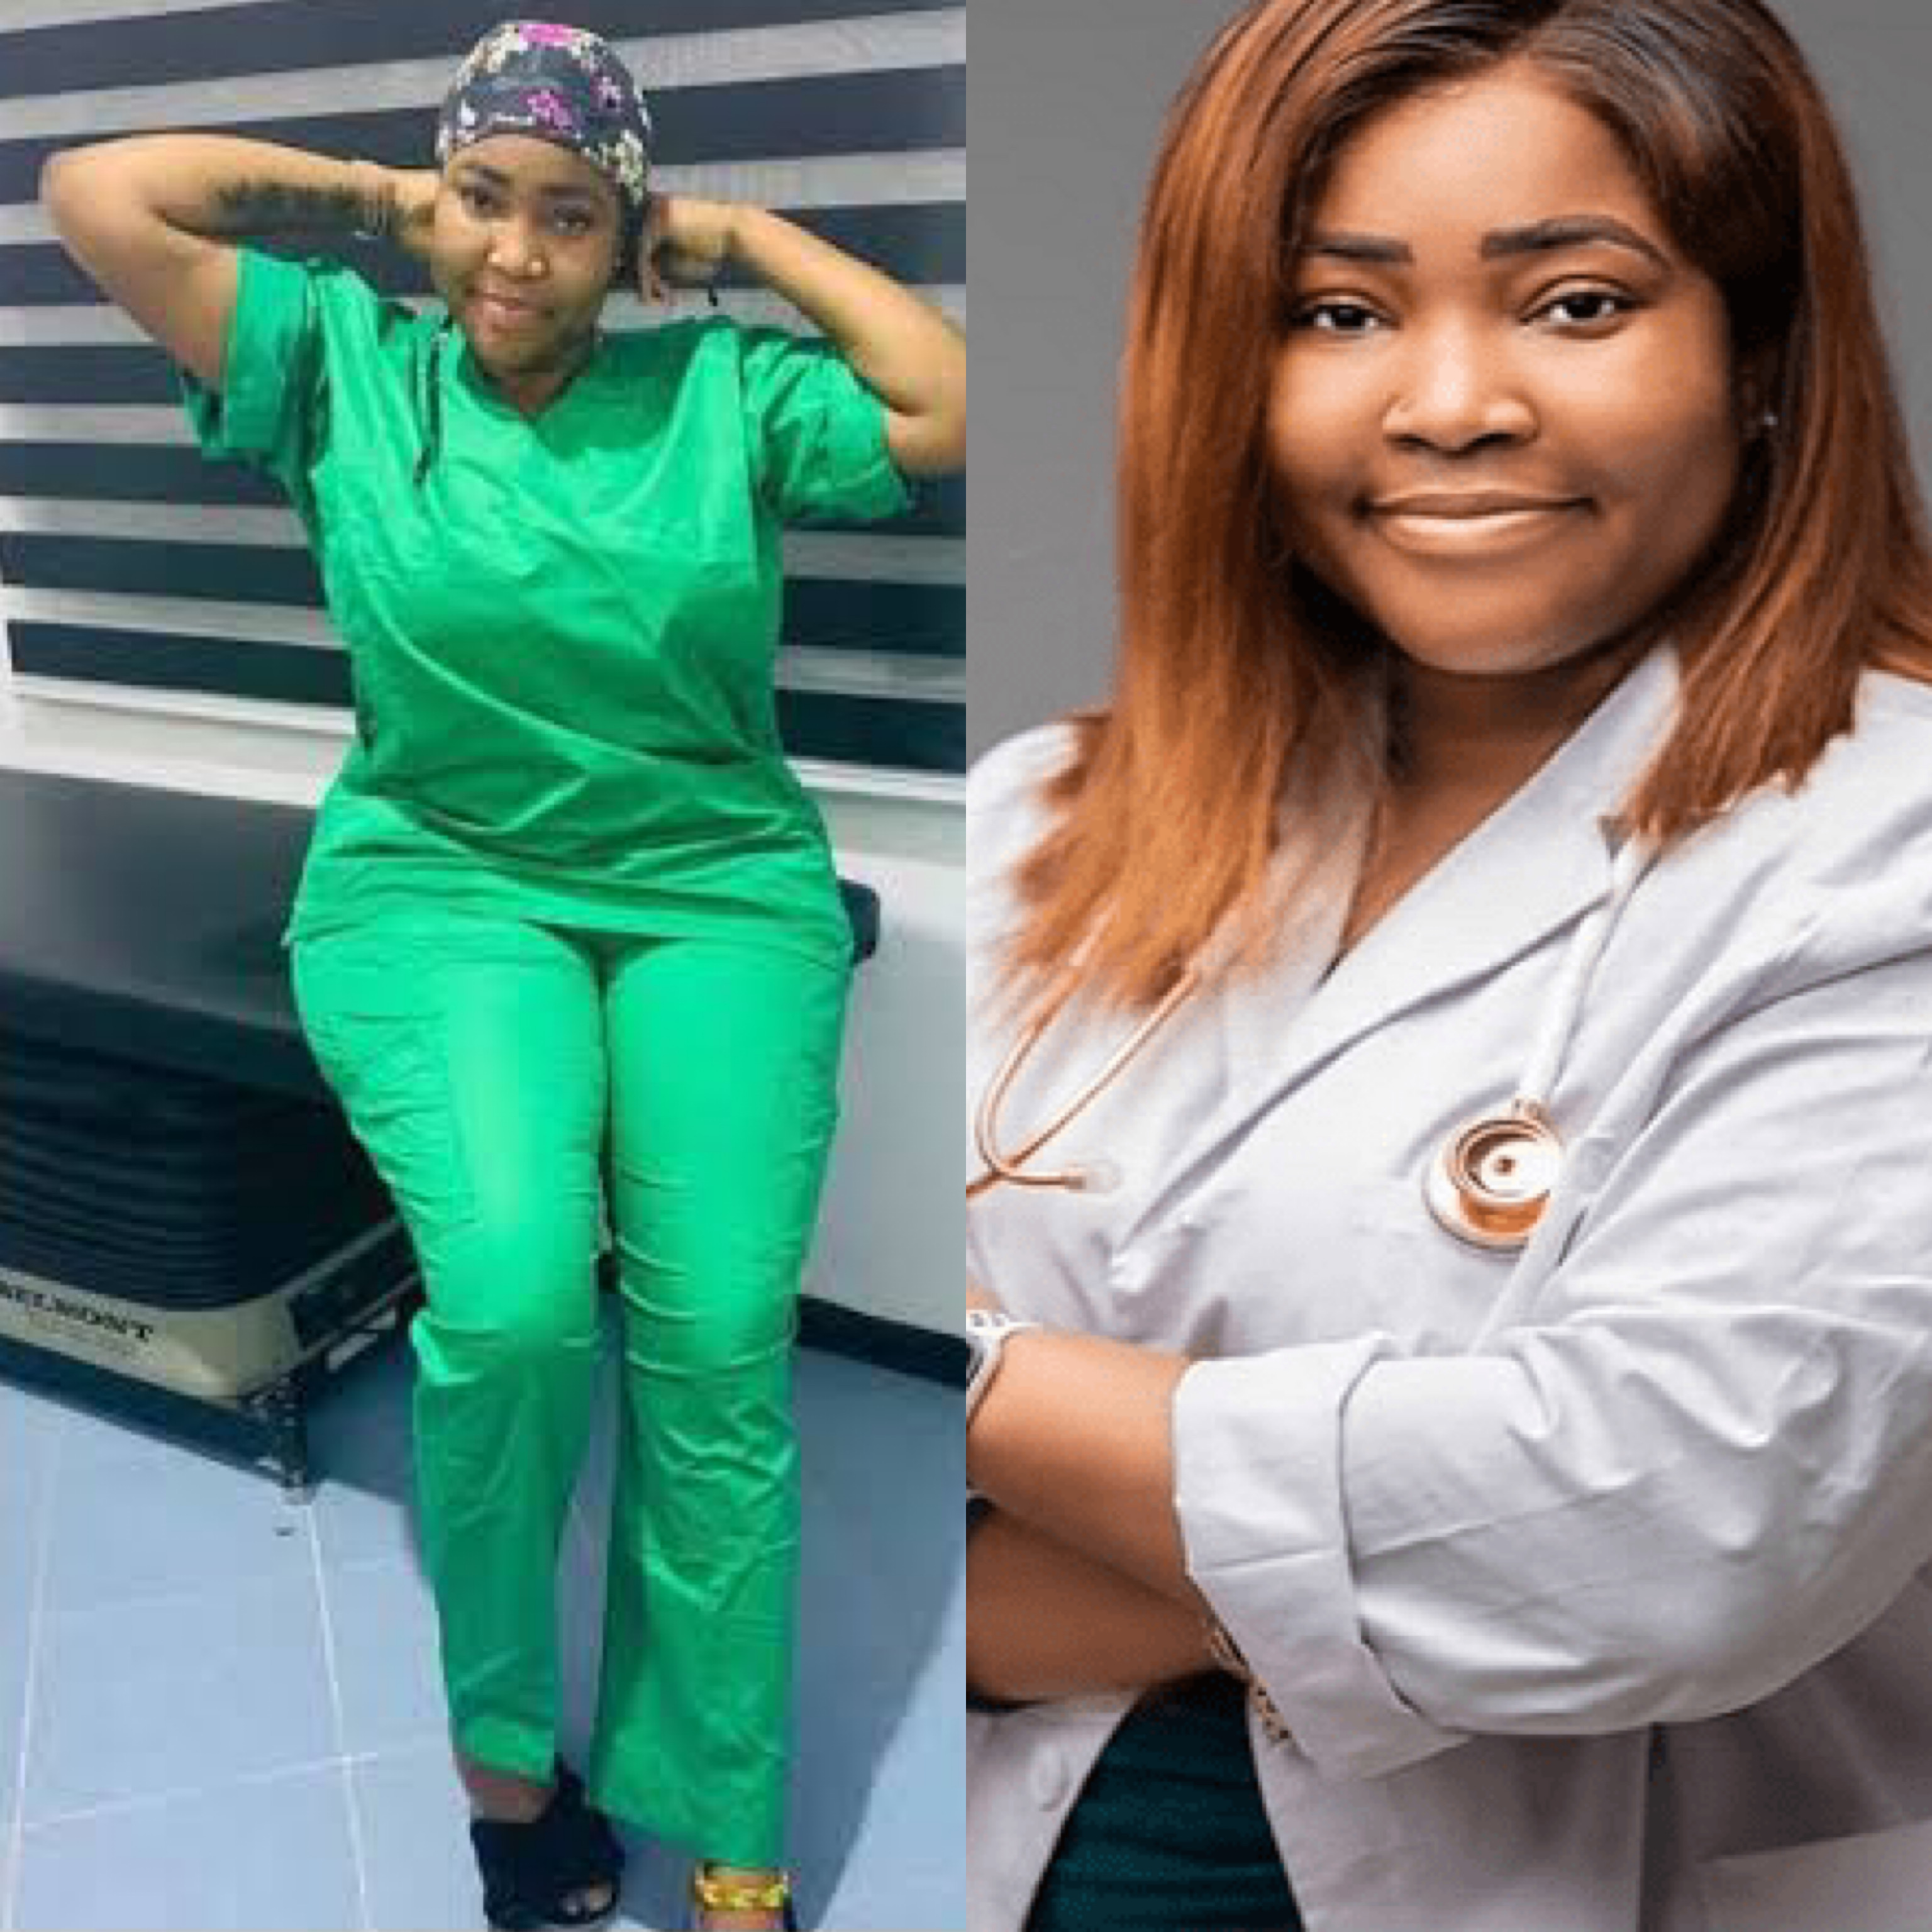 LUTH petitions Dr Anu of MedContour